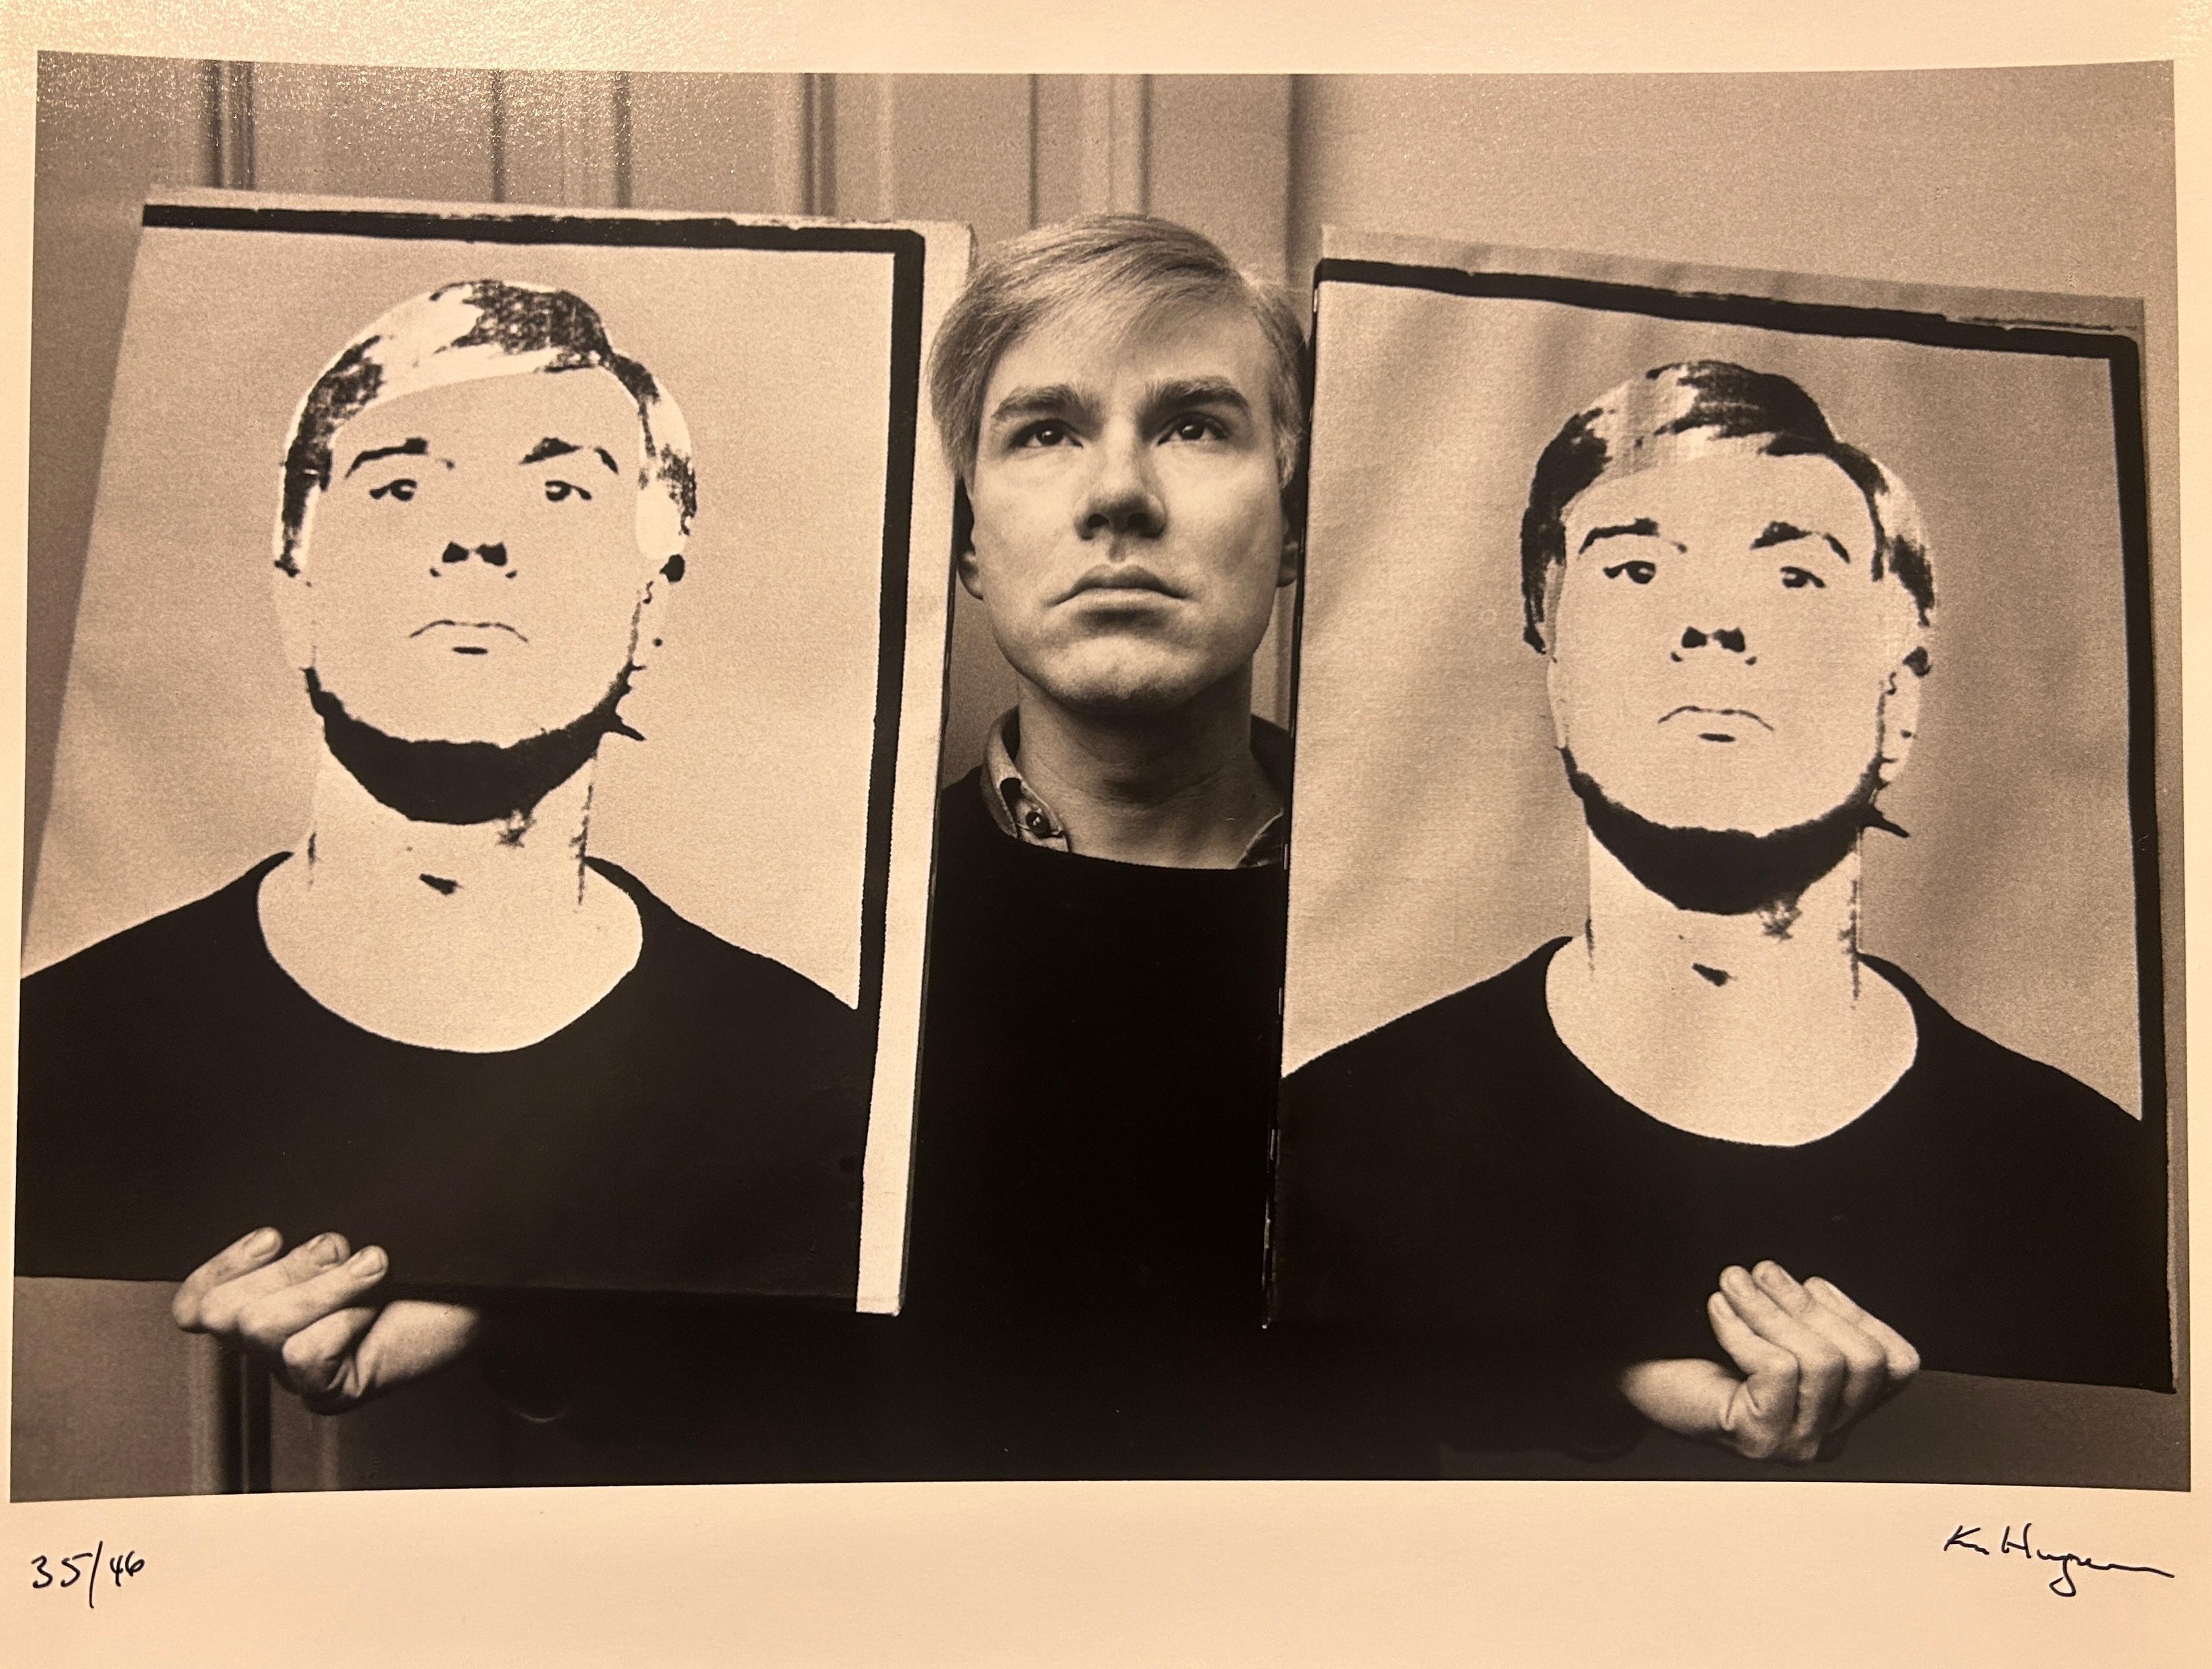 The Pop Artists - Andy Warhol with Portraits - Photograph by Ken Heyman